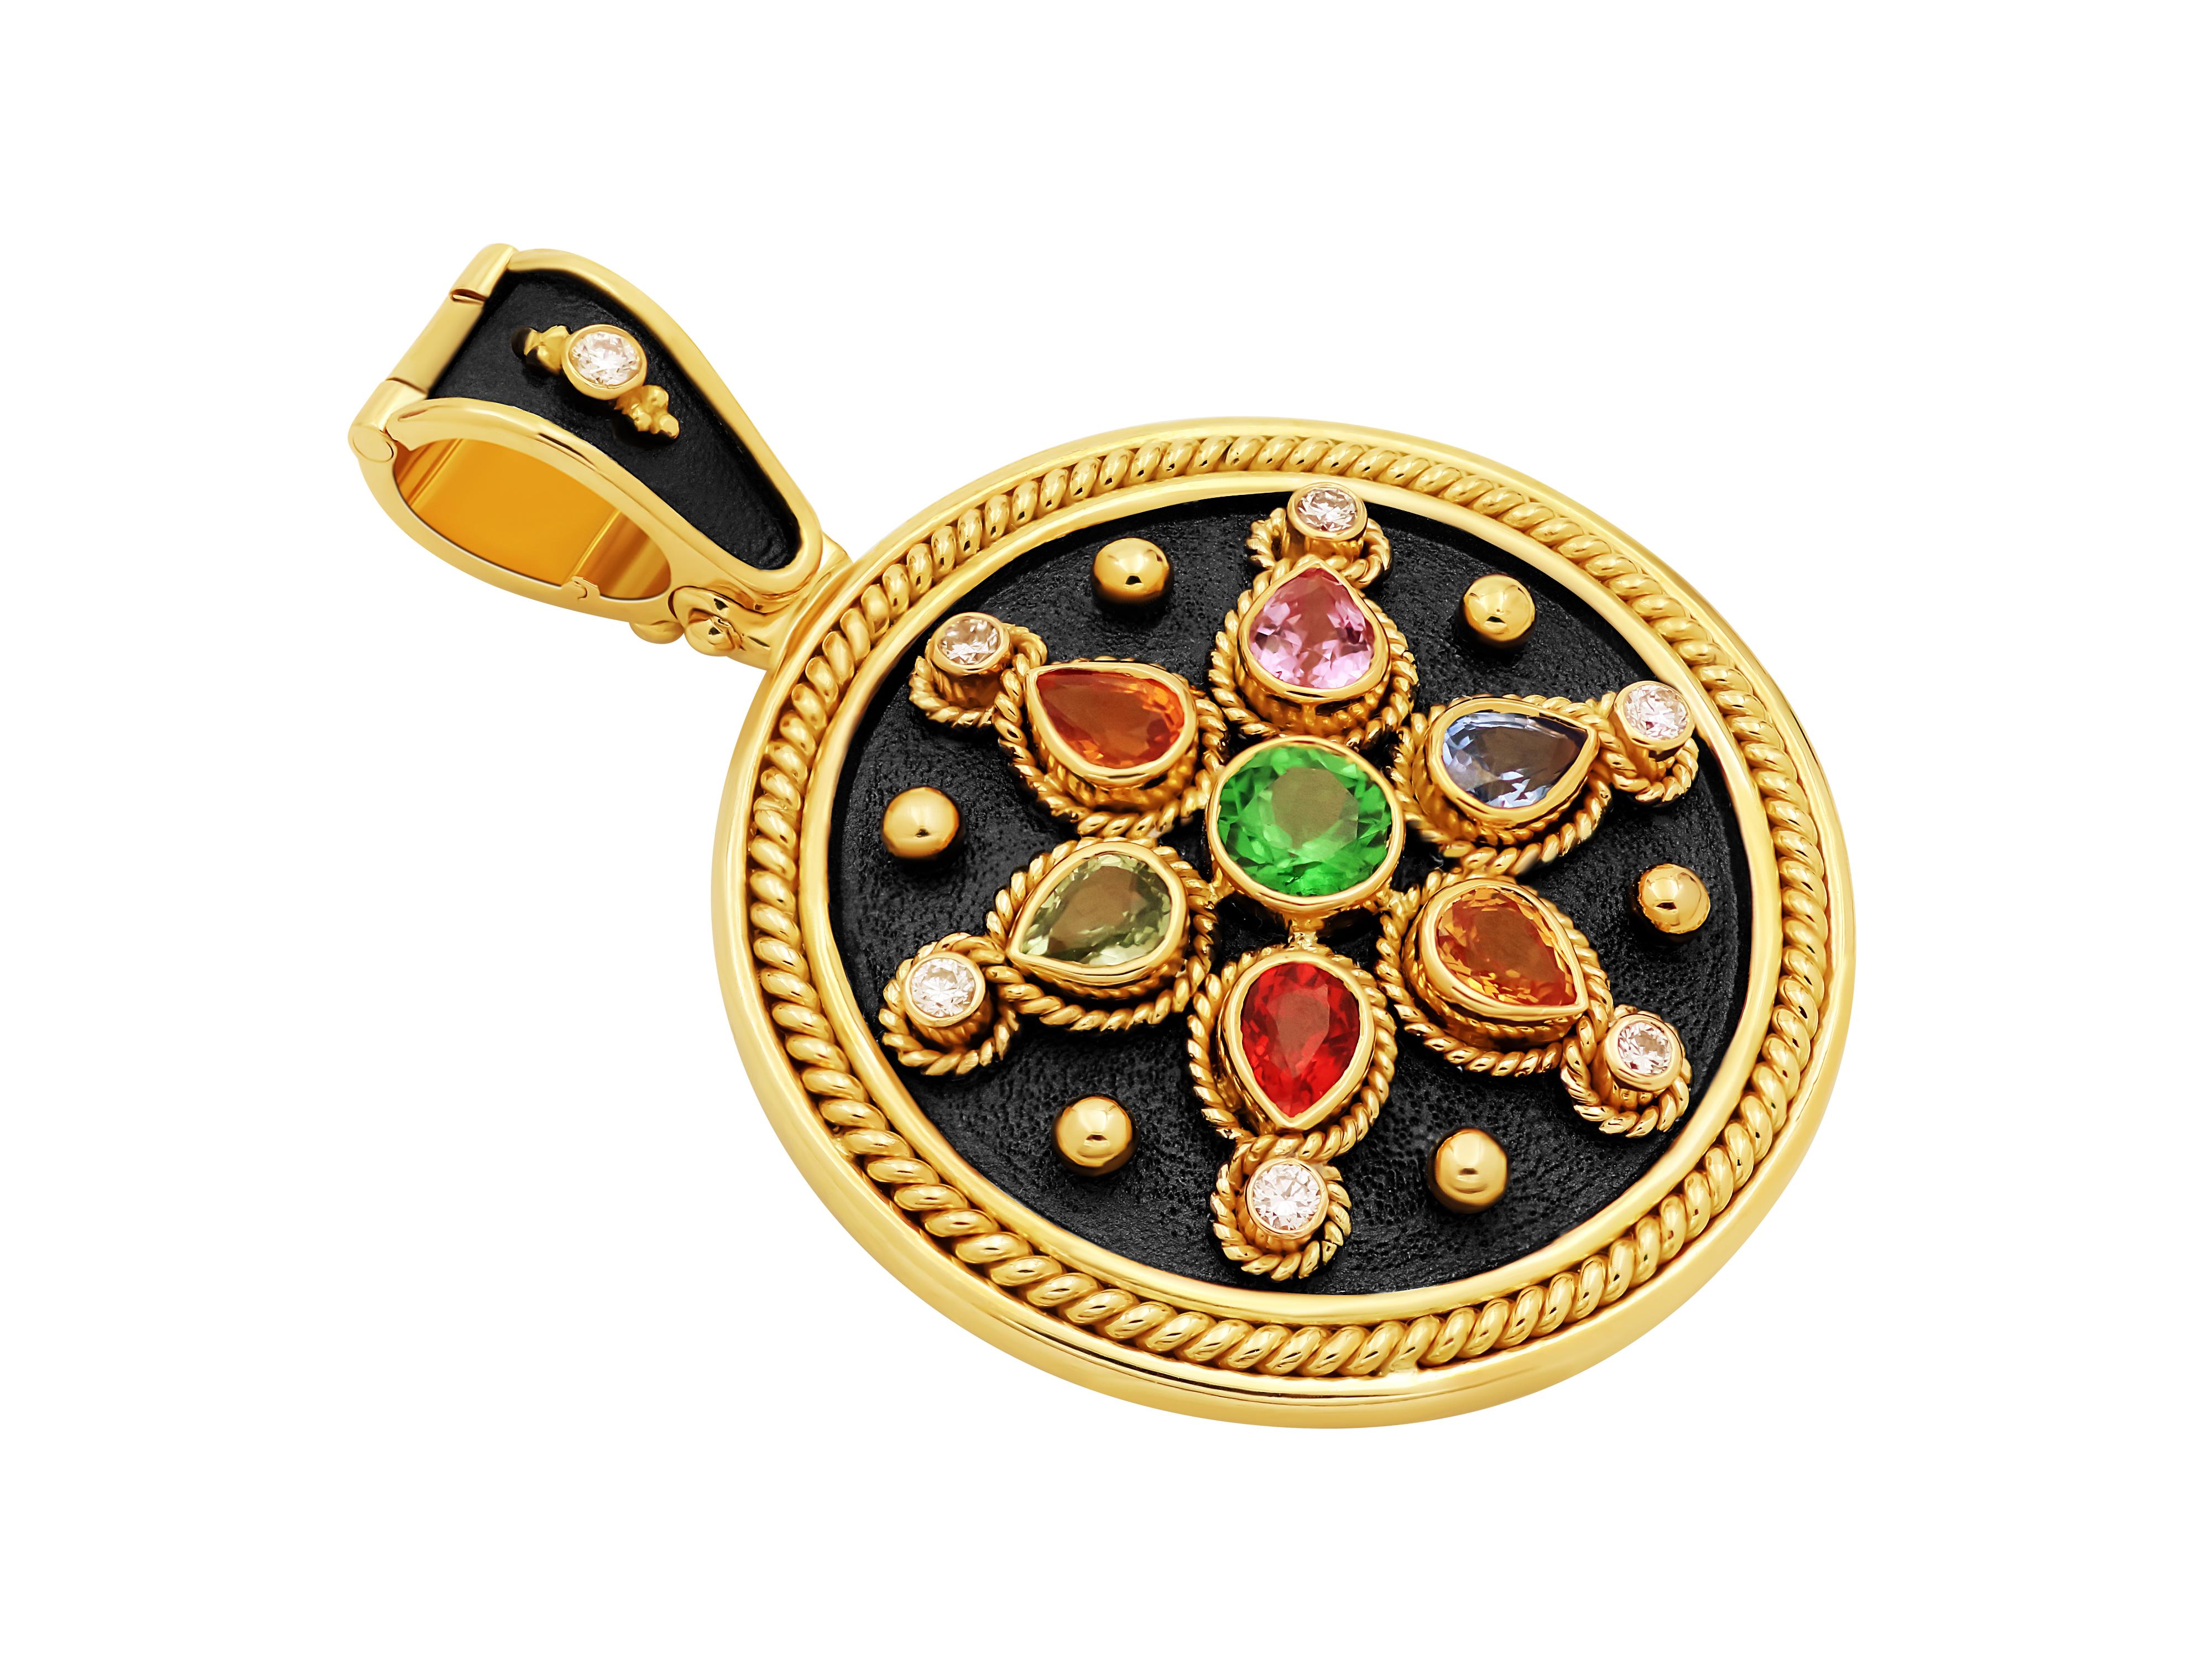 Colorful noir pendant in 18k yellow gold. Pear cut 1.66 carats sapphires in every color and 0.11 carats brilliant cut diamonds circle around this pendant with beautiful filigrees and granulation and black platinum background for high contrast. With